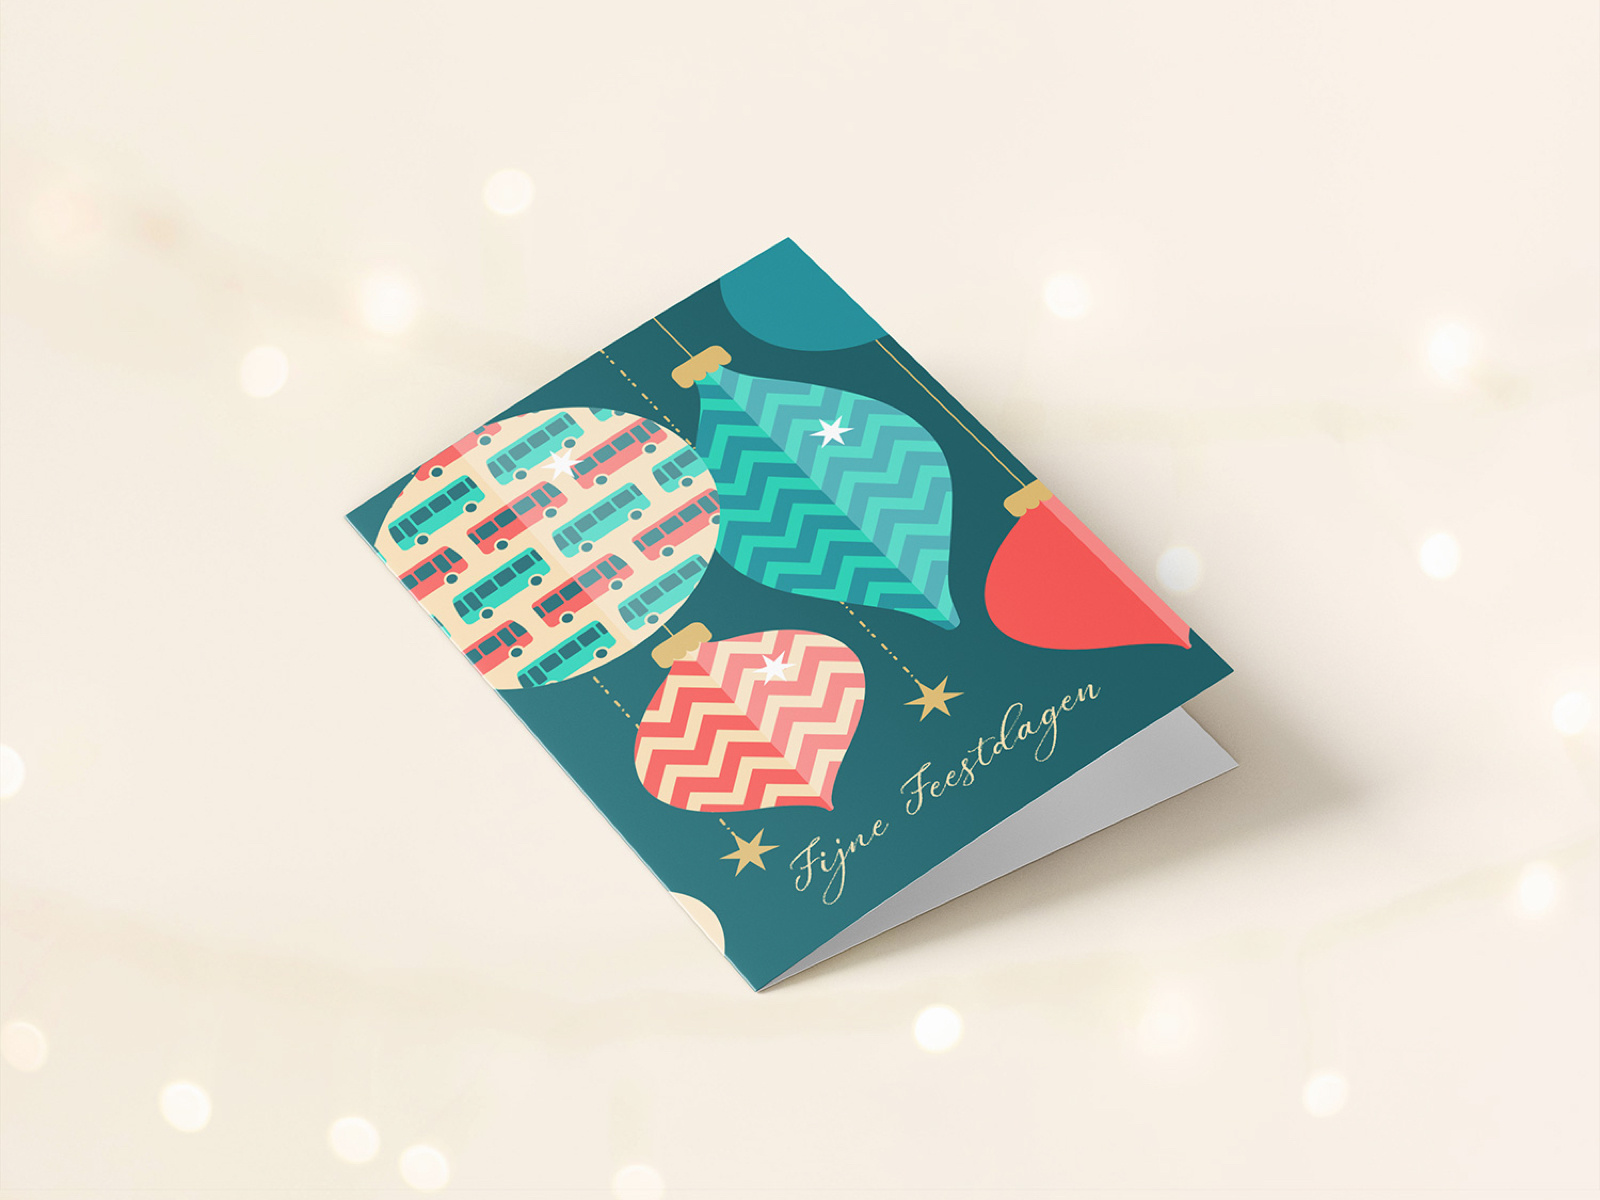 'Happy Holidays' greeting card for Arriva Netherlands